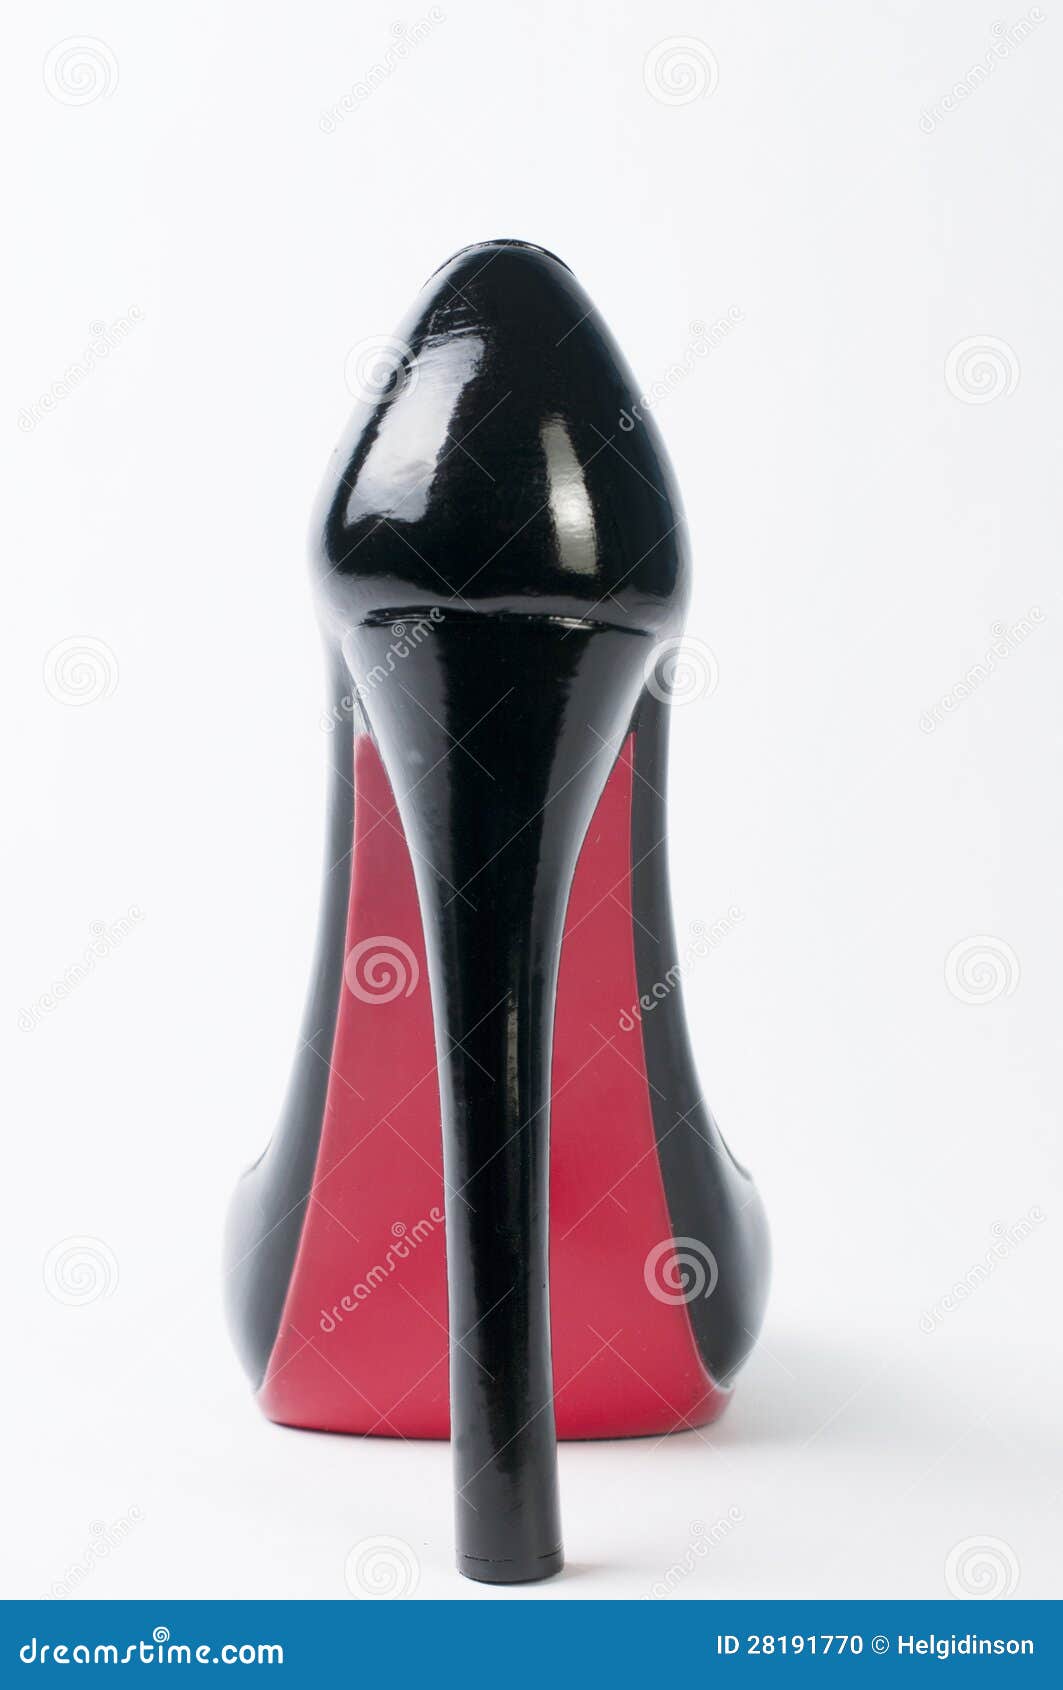 Red Shoe On A Black Reflective Surface Background, Pictures Of High Heel  Shoes, Shoes, High Heels Background Image And Wallpaper for Free Download